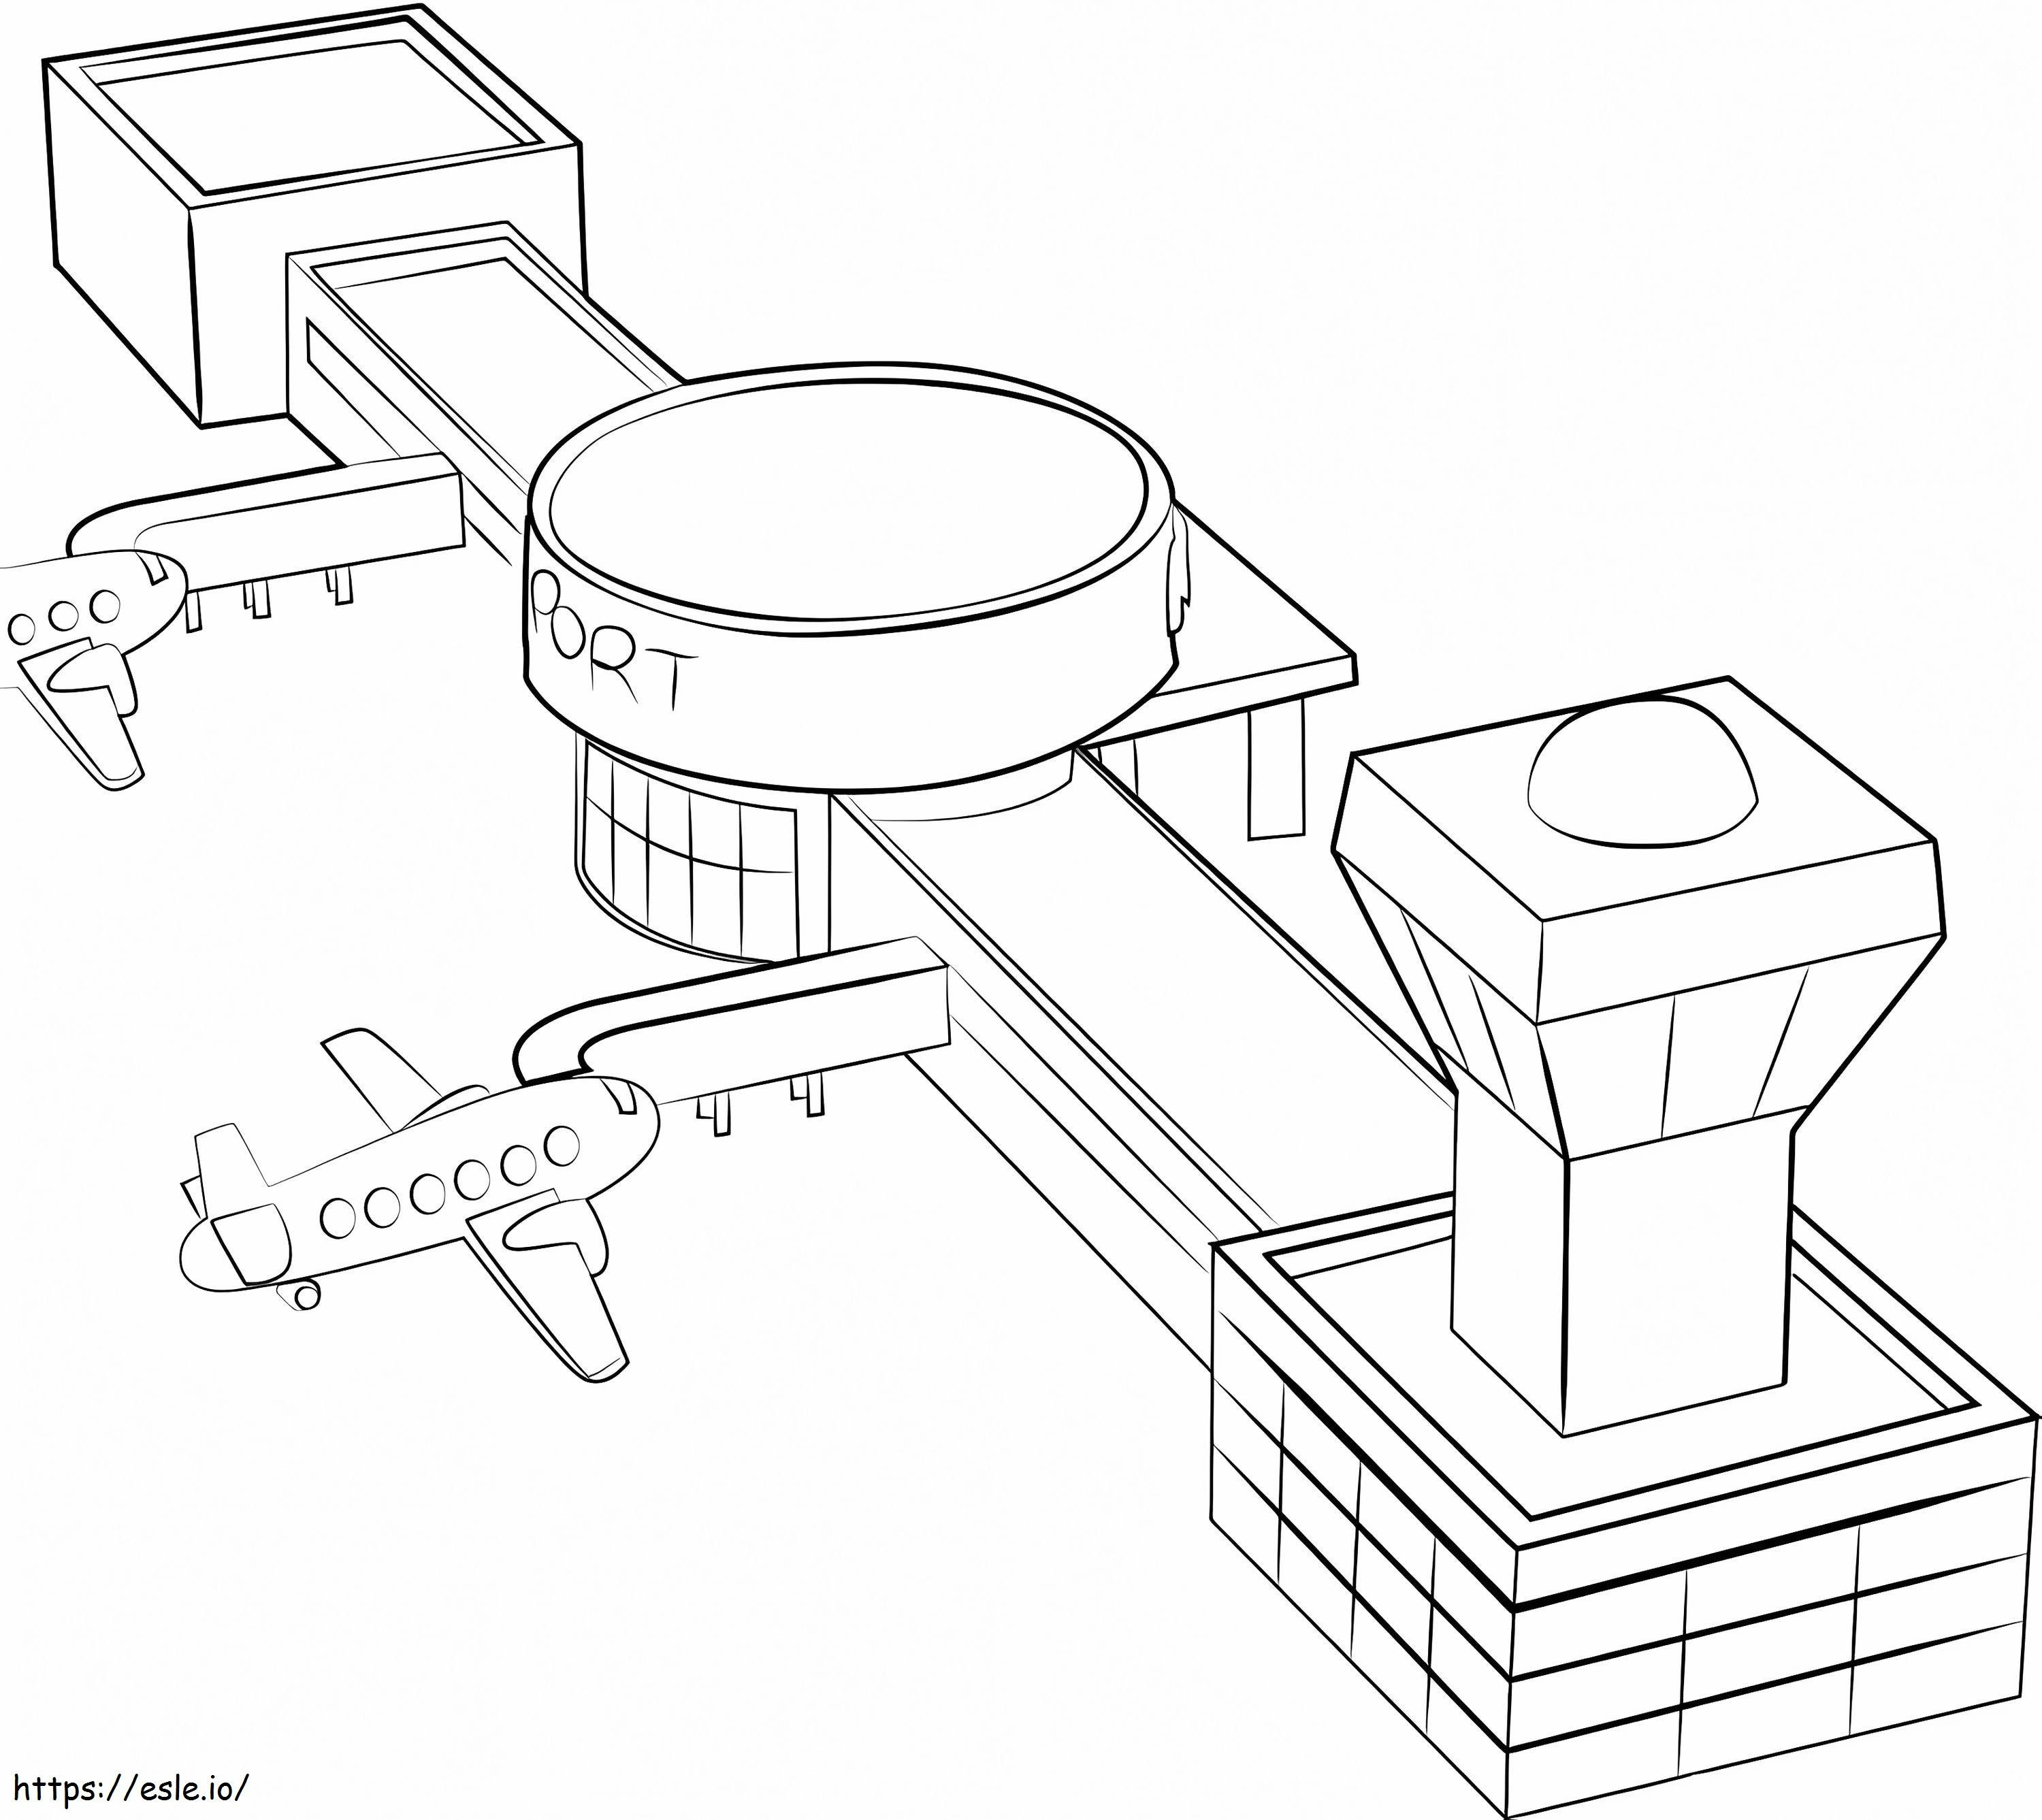 Airport 4 coloring page